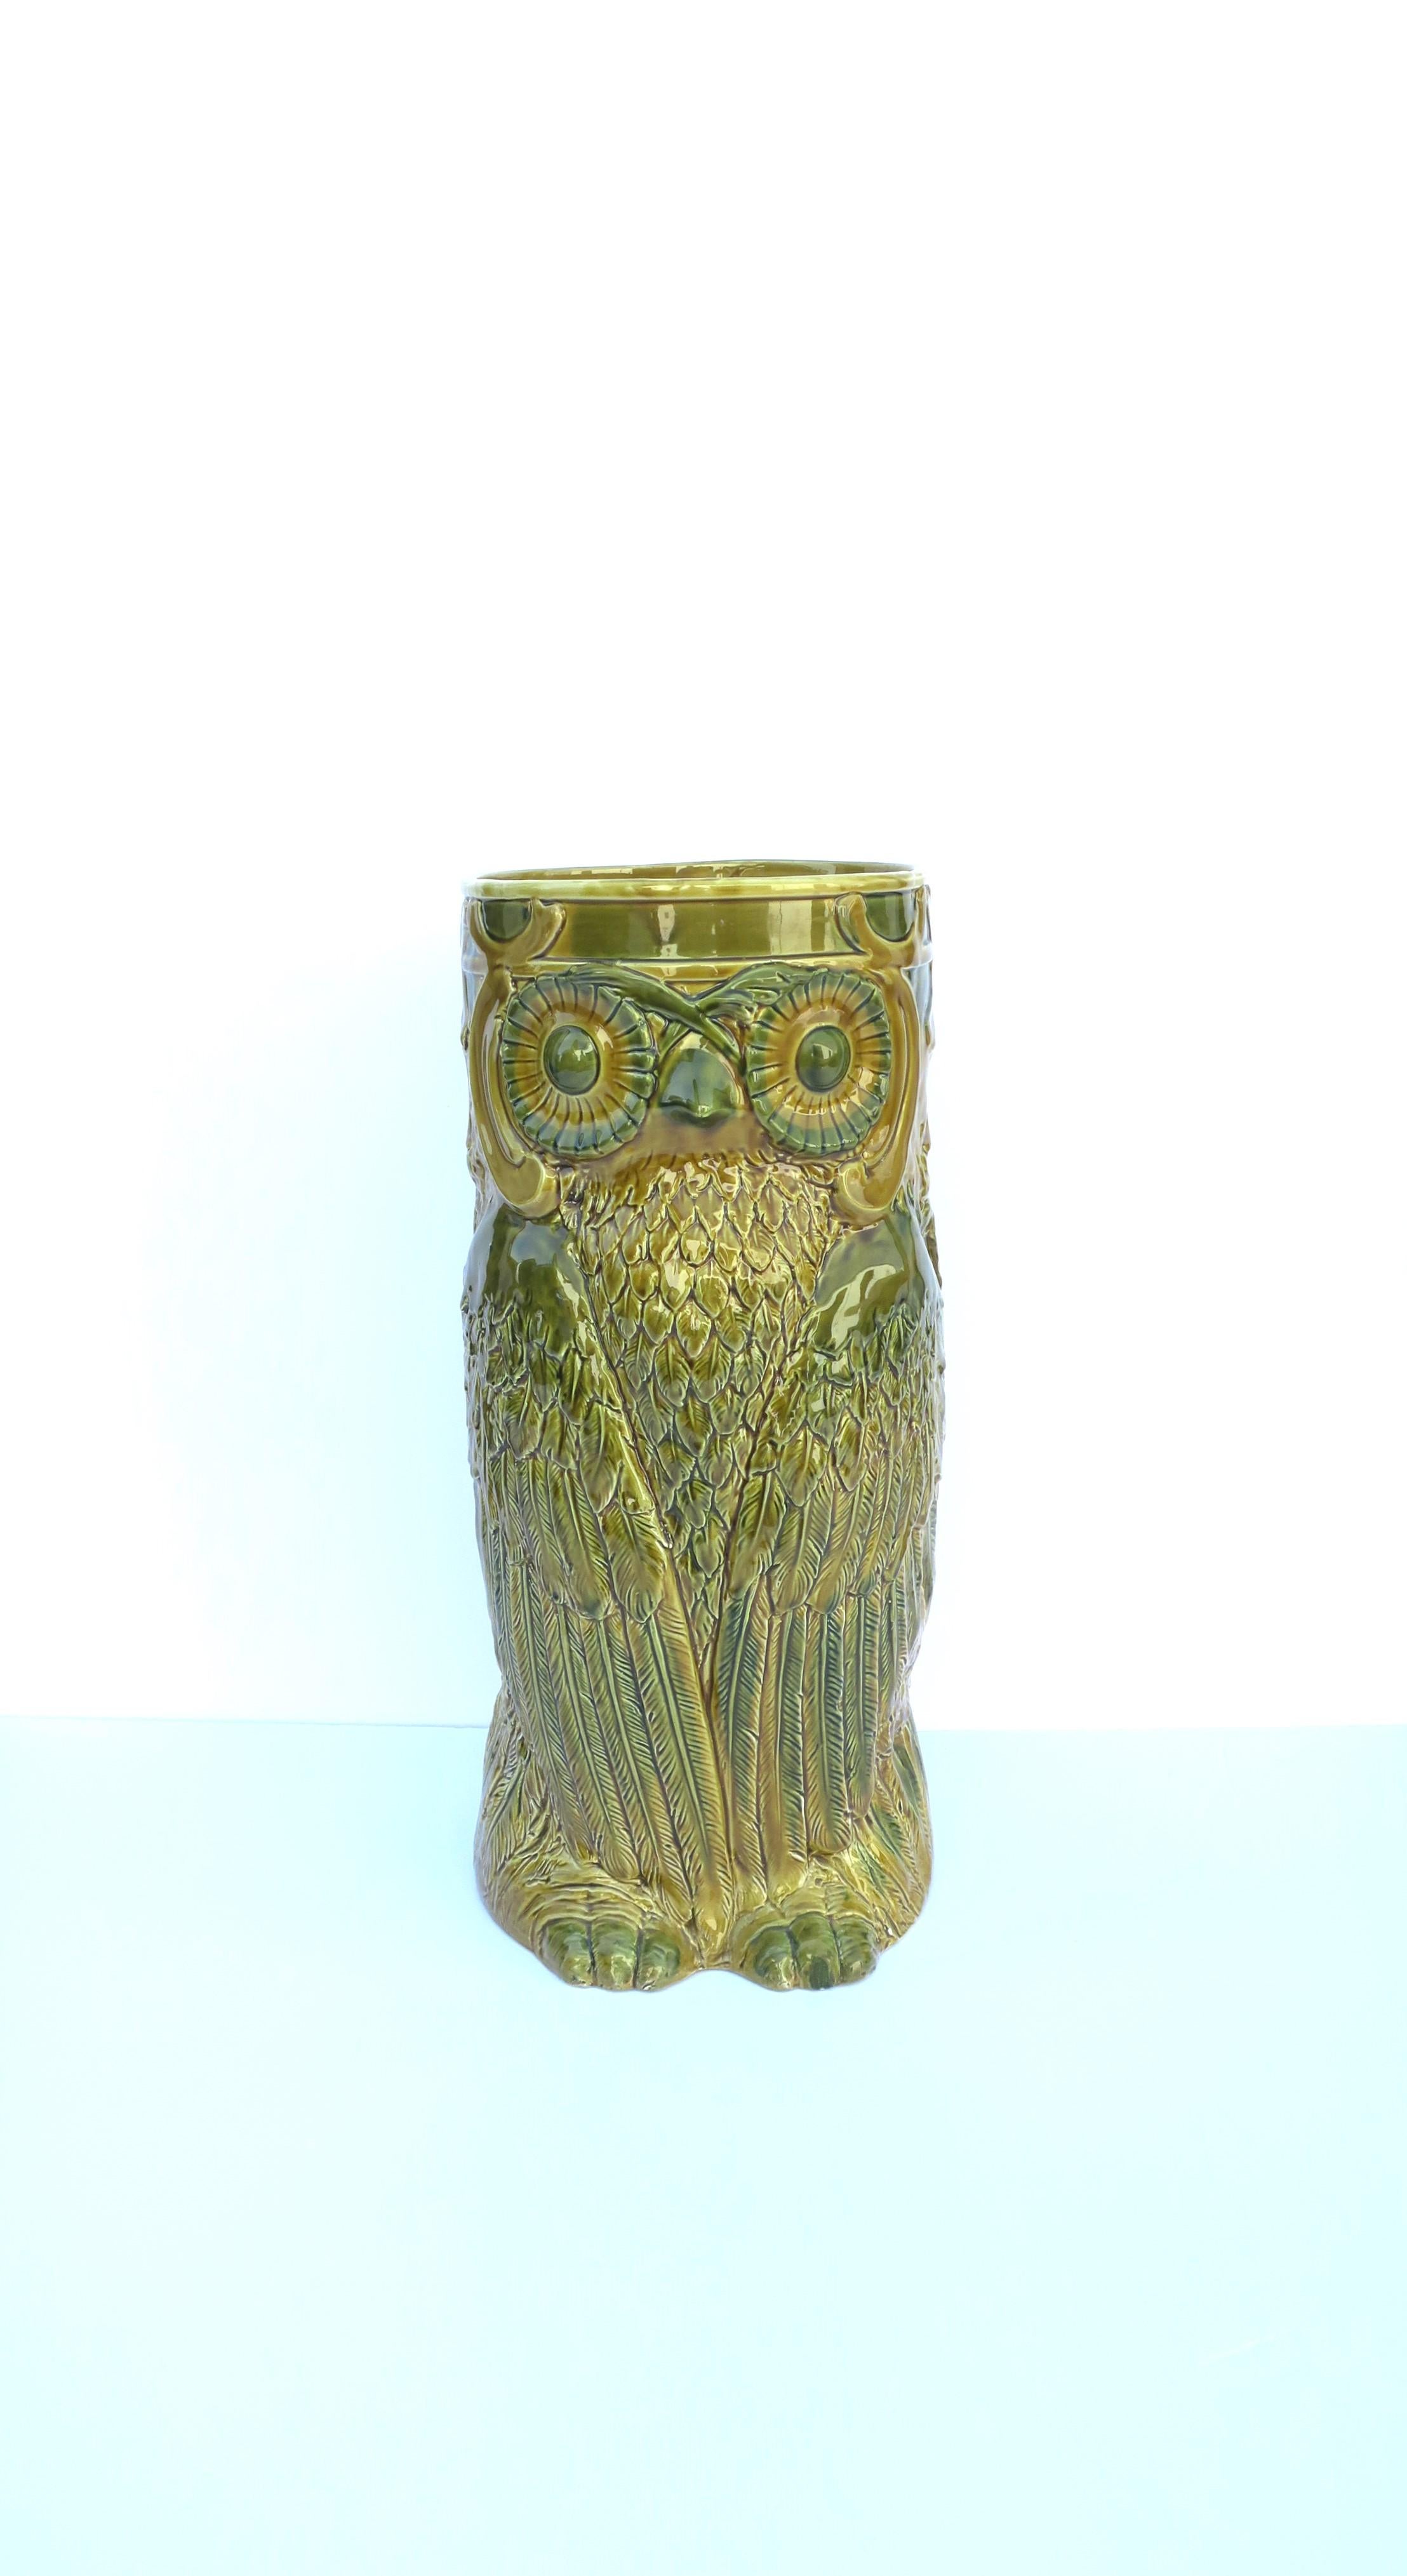 A beautiful Italian glazed ceramic owl umbrella holder stand, circa mid-20th century, 1960s, Italy. Color hues include yellow and green. Piece is marked on understand 